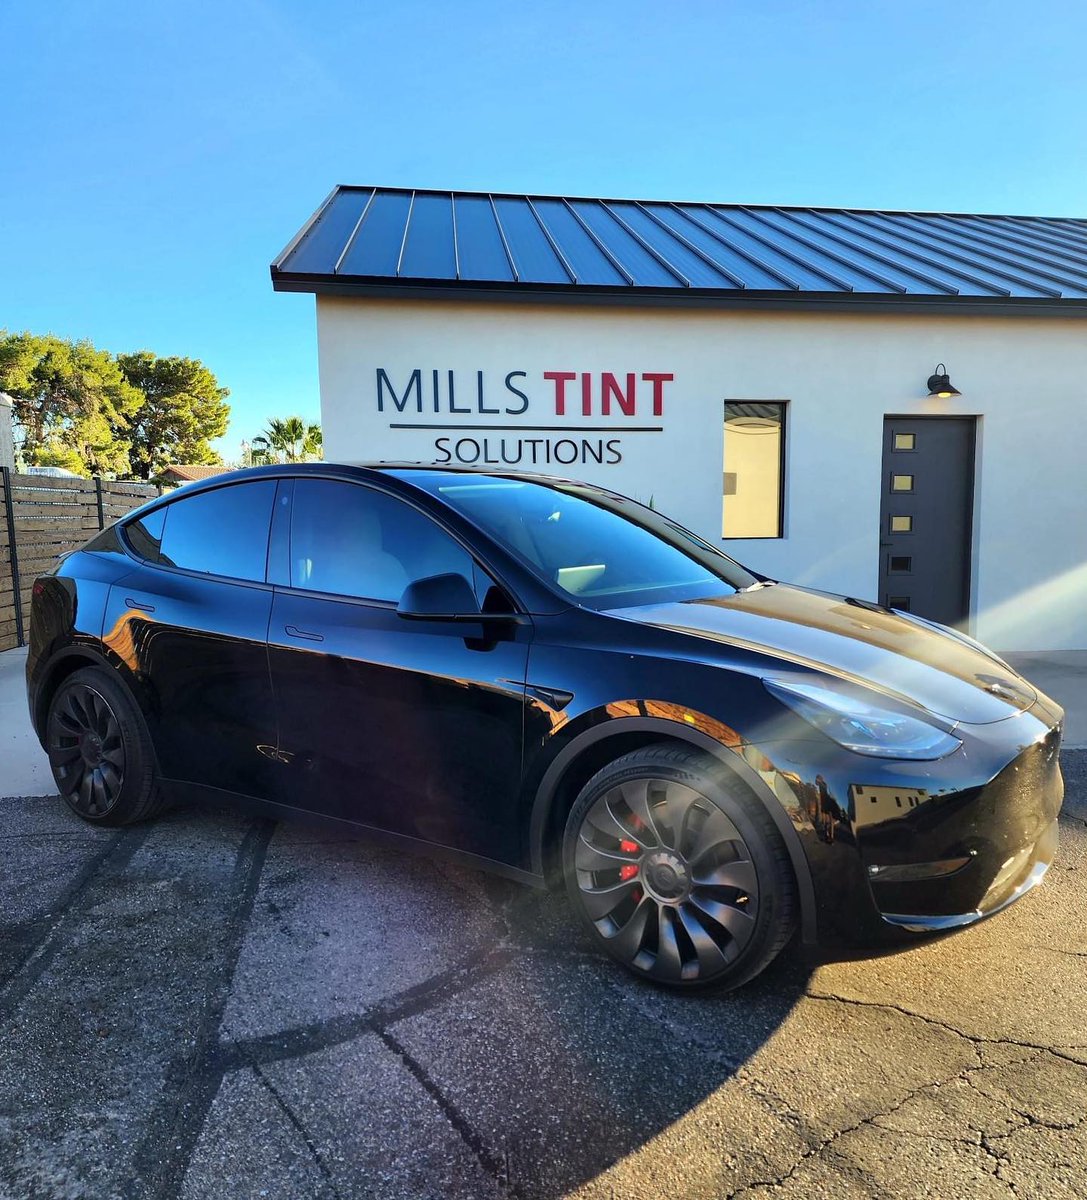 free estimate and schedule your appointment today!
millstintaz.com
#Tinting #tintedwindows #windowtint #WindowTinting #windowtinter #windowtintshop #windowtintingservice #windowtintingspecialist #windowfilm #windowfilminstallation #windowfilminstaller #windowfilmspecials